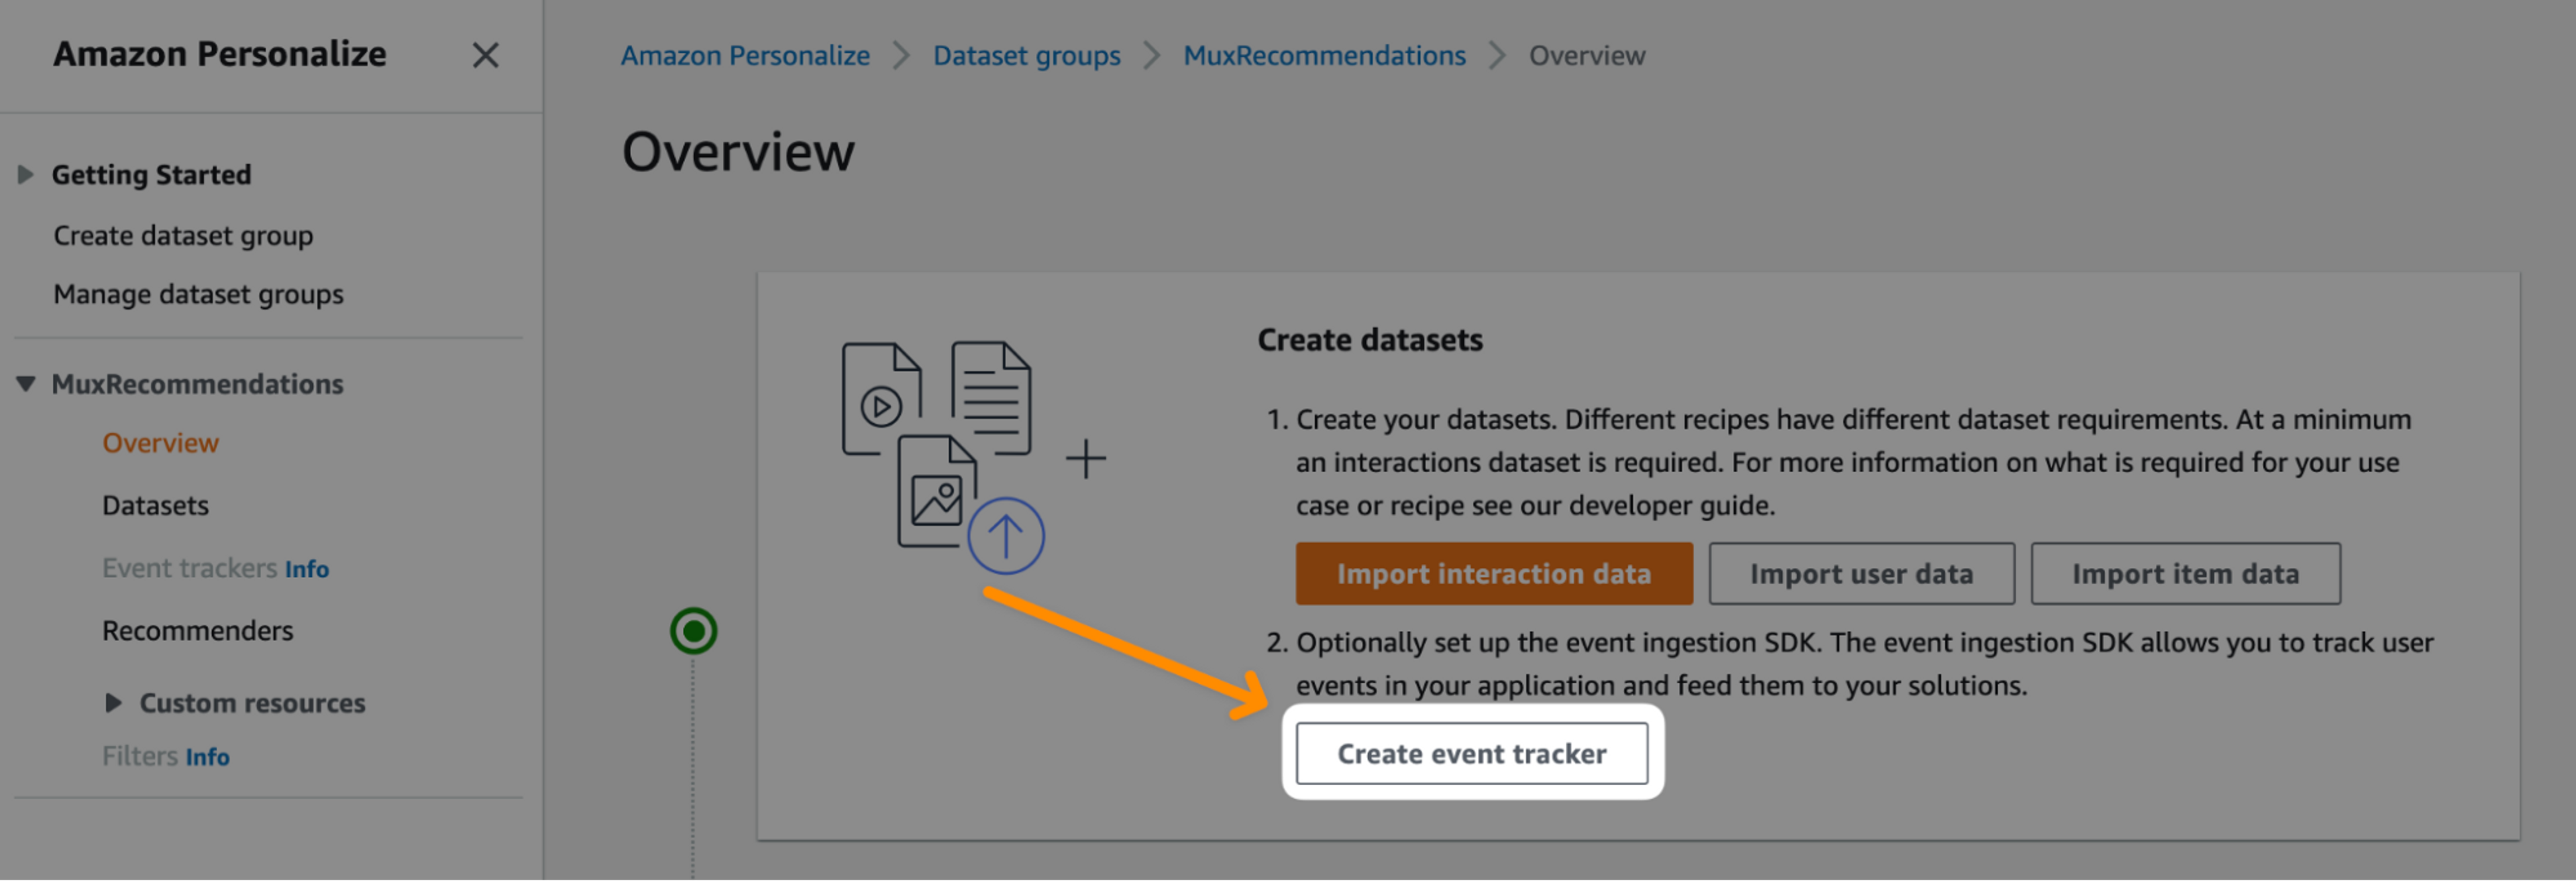 A screenshot of the Amazon Personalize dashboard the "Create event tracker" button highlighted